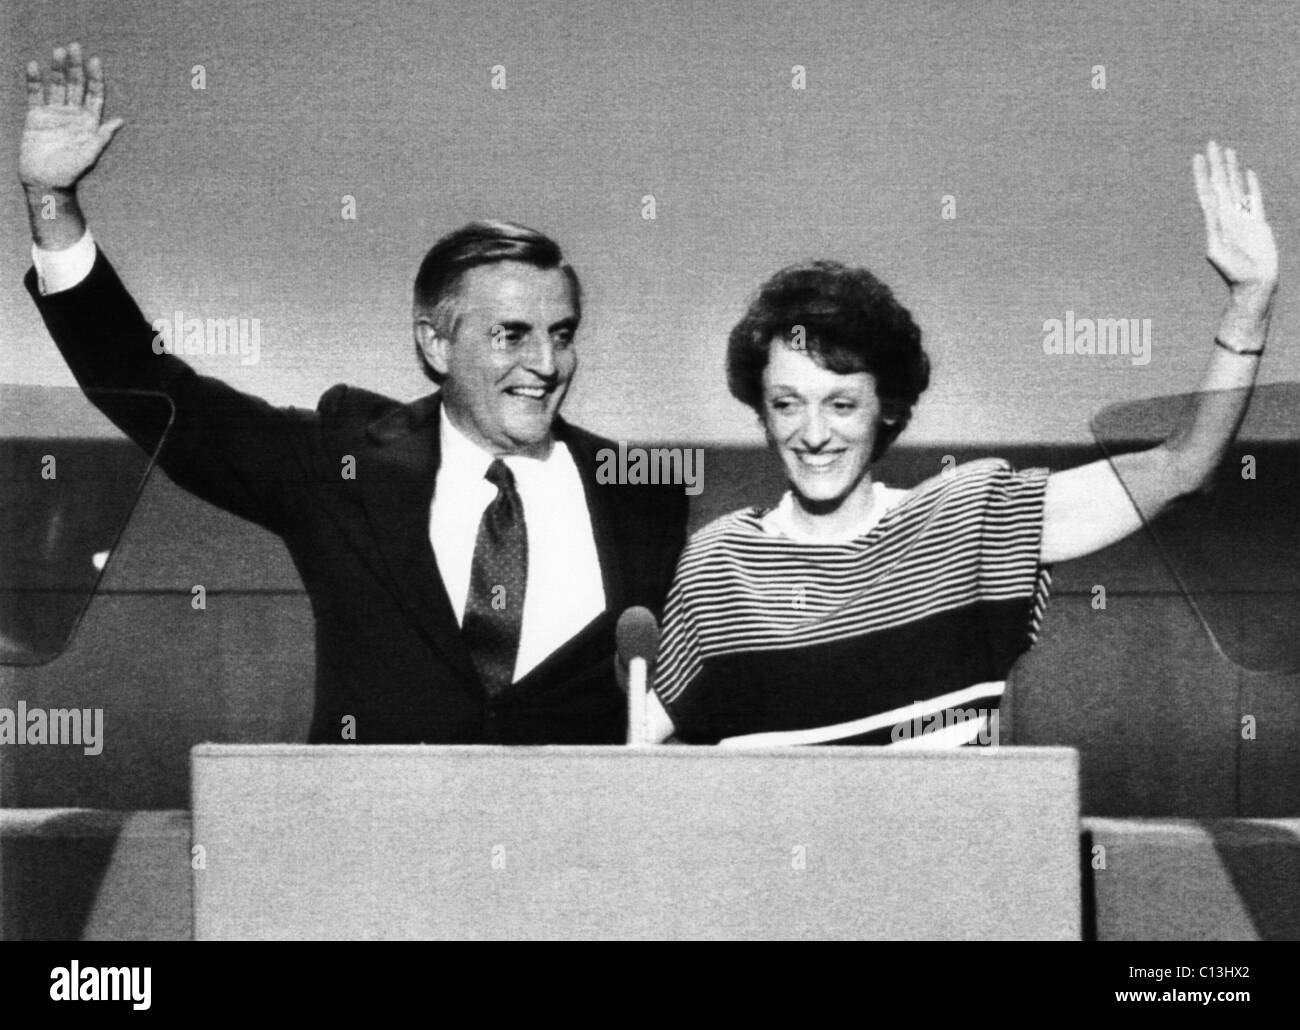 US Elections. Democratic presidential candidate Walter Mondale, and Joan Mondale at the Democratic National Convention in San Francisco, California, July, 1984. Stock Photo